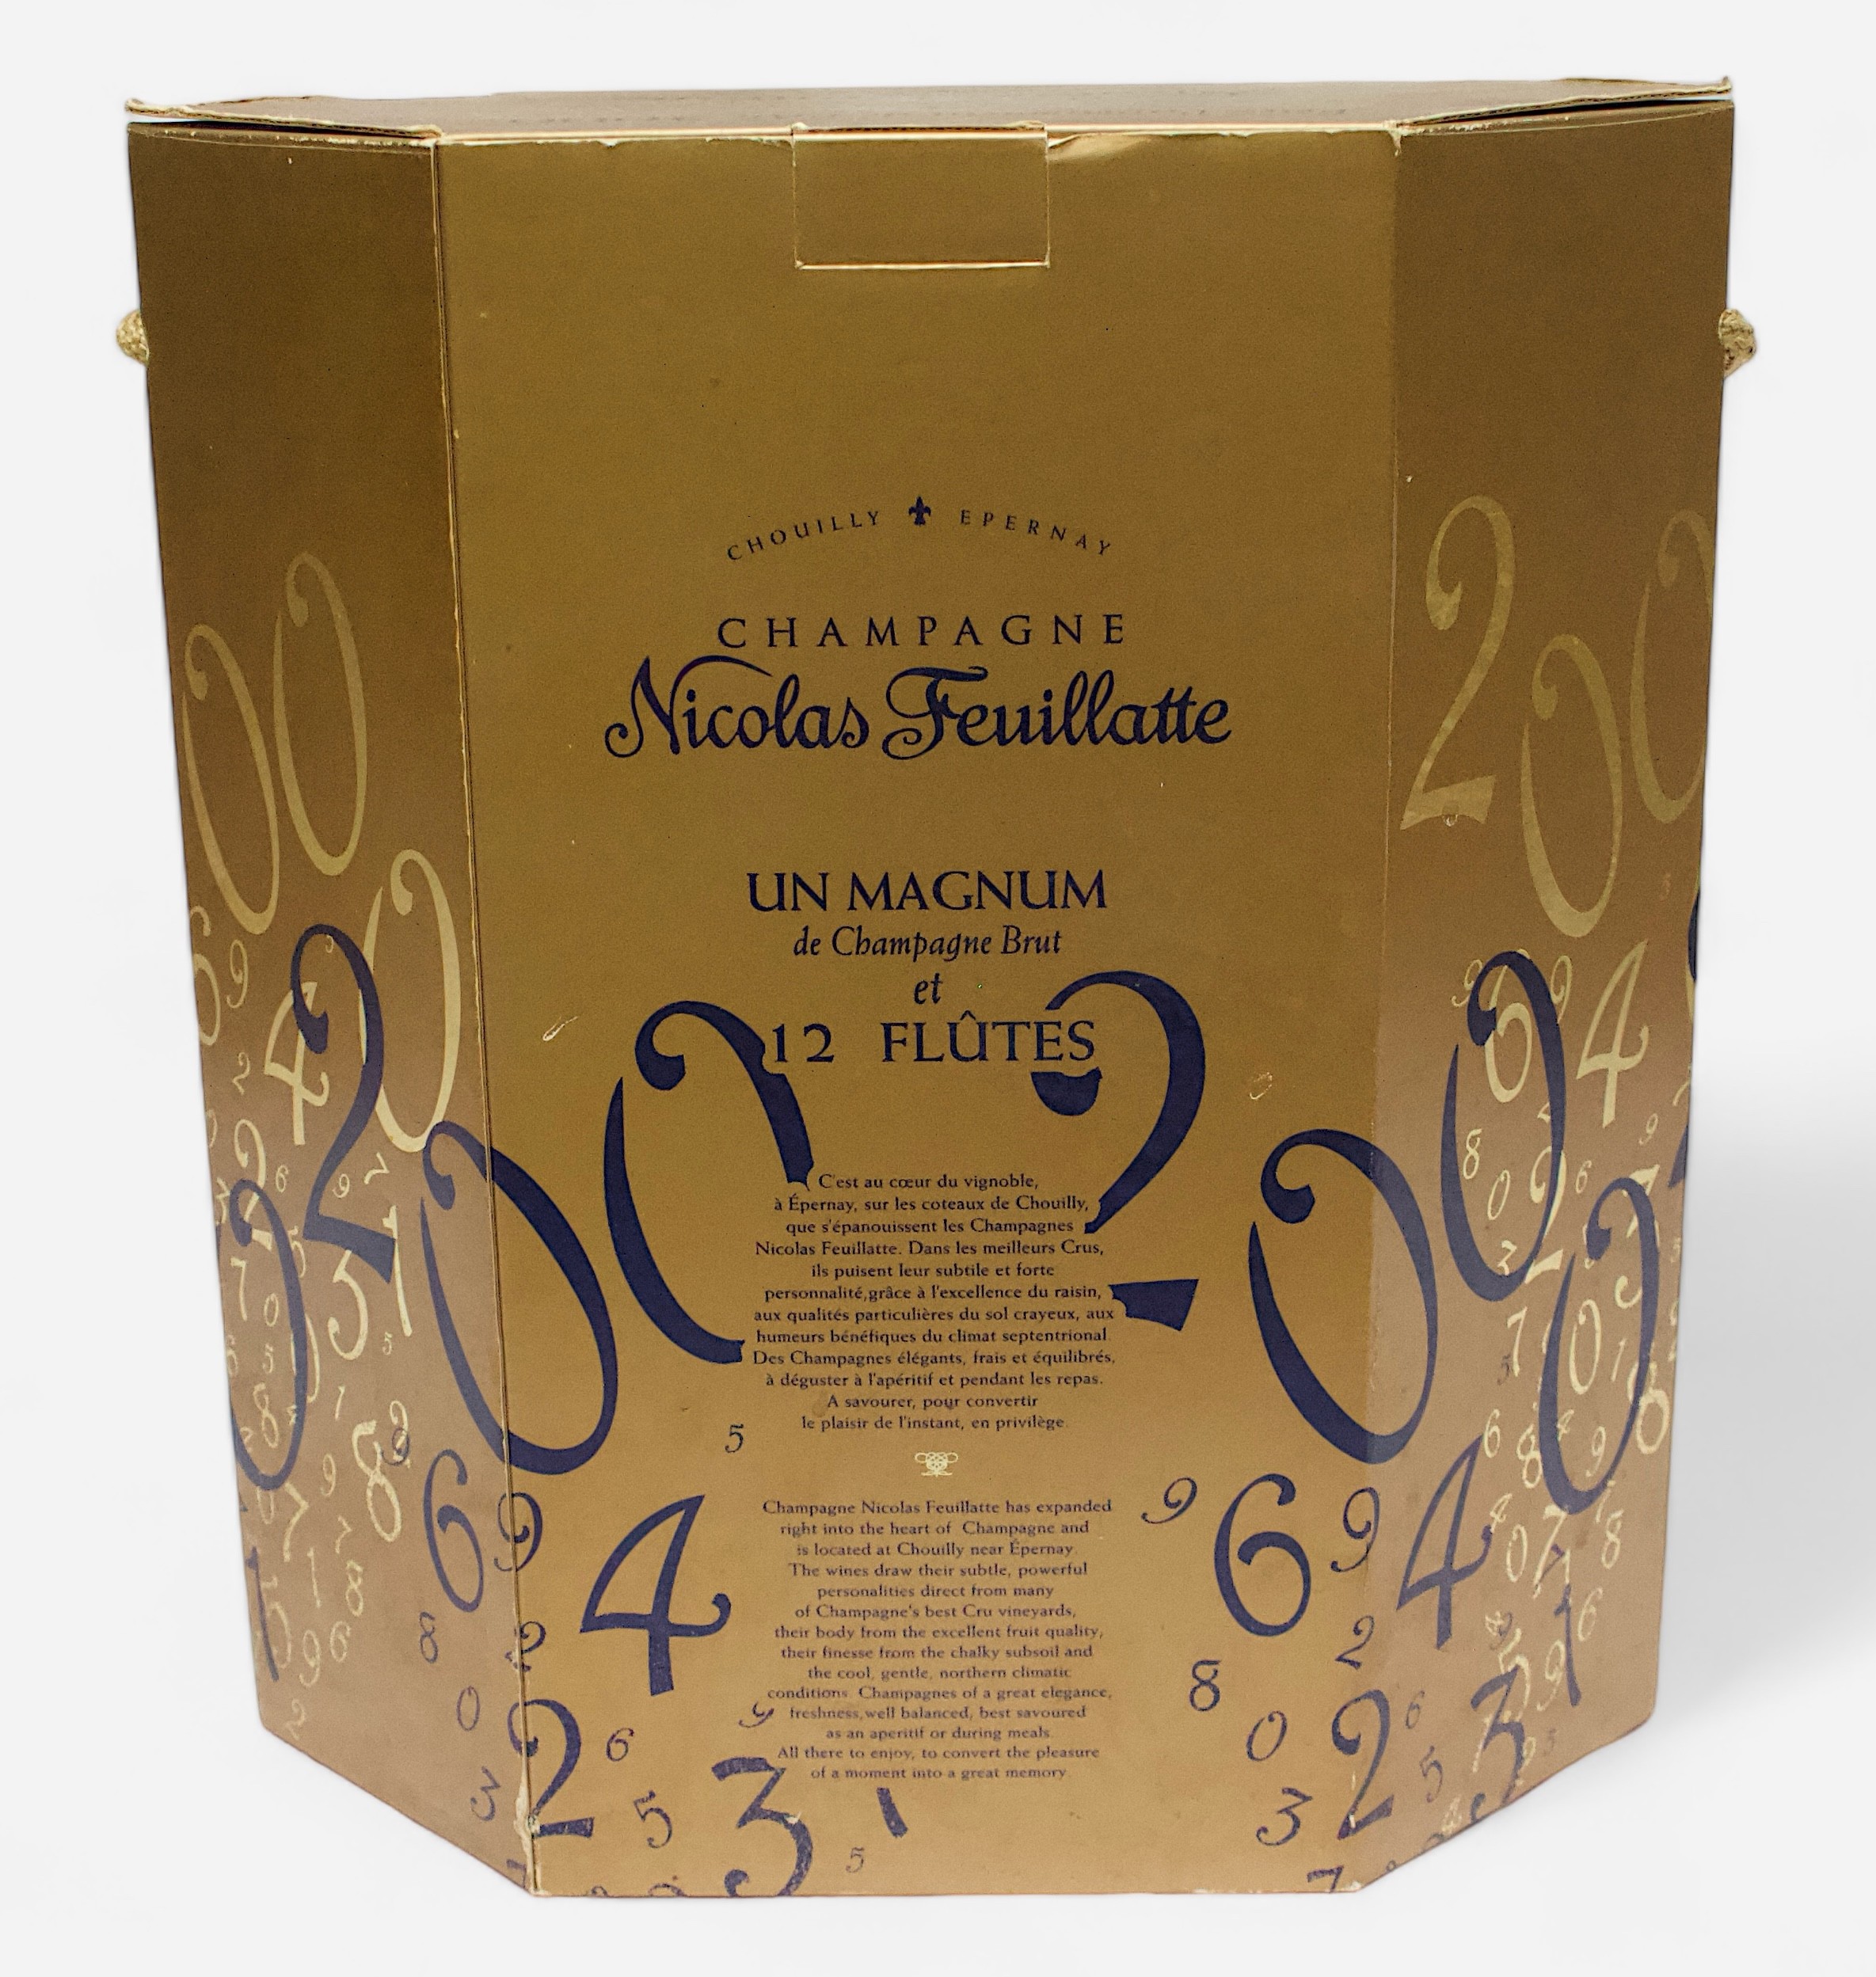 A commemorative Millenium magnum bottle of Nicolas Feuillatte champagne, with a set of 12 flutes, in - Image 2 of 2